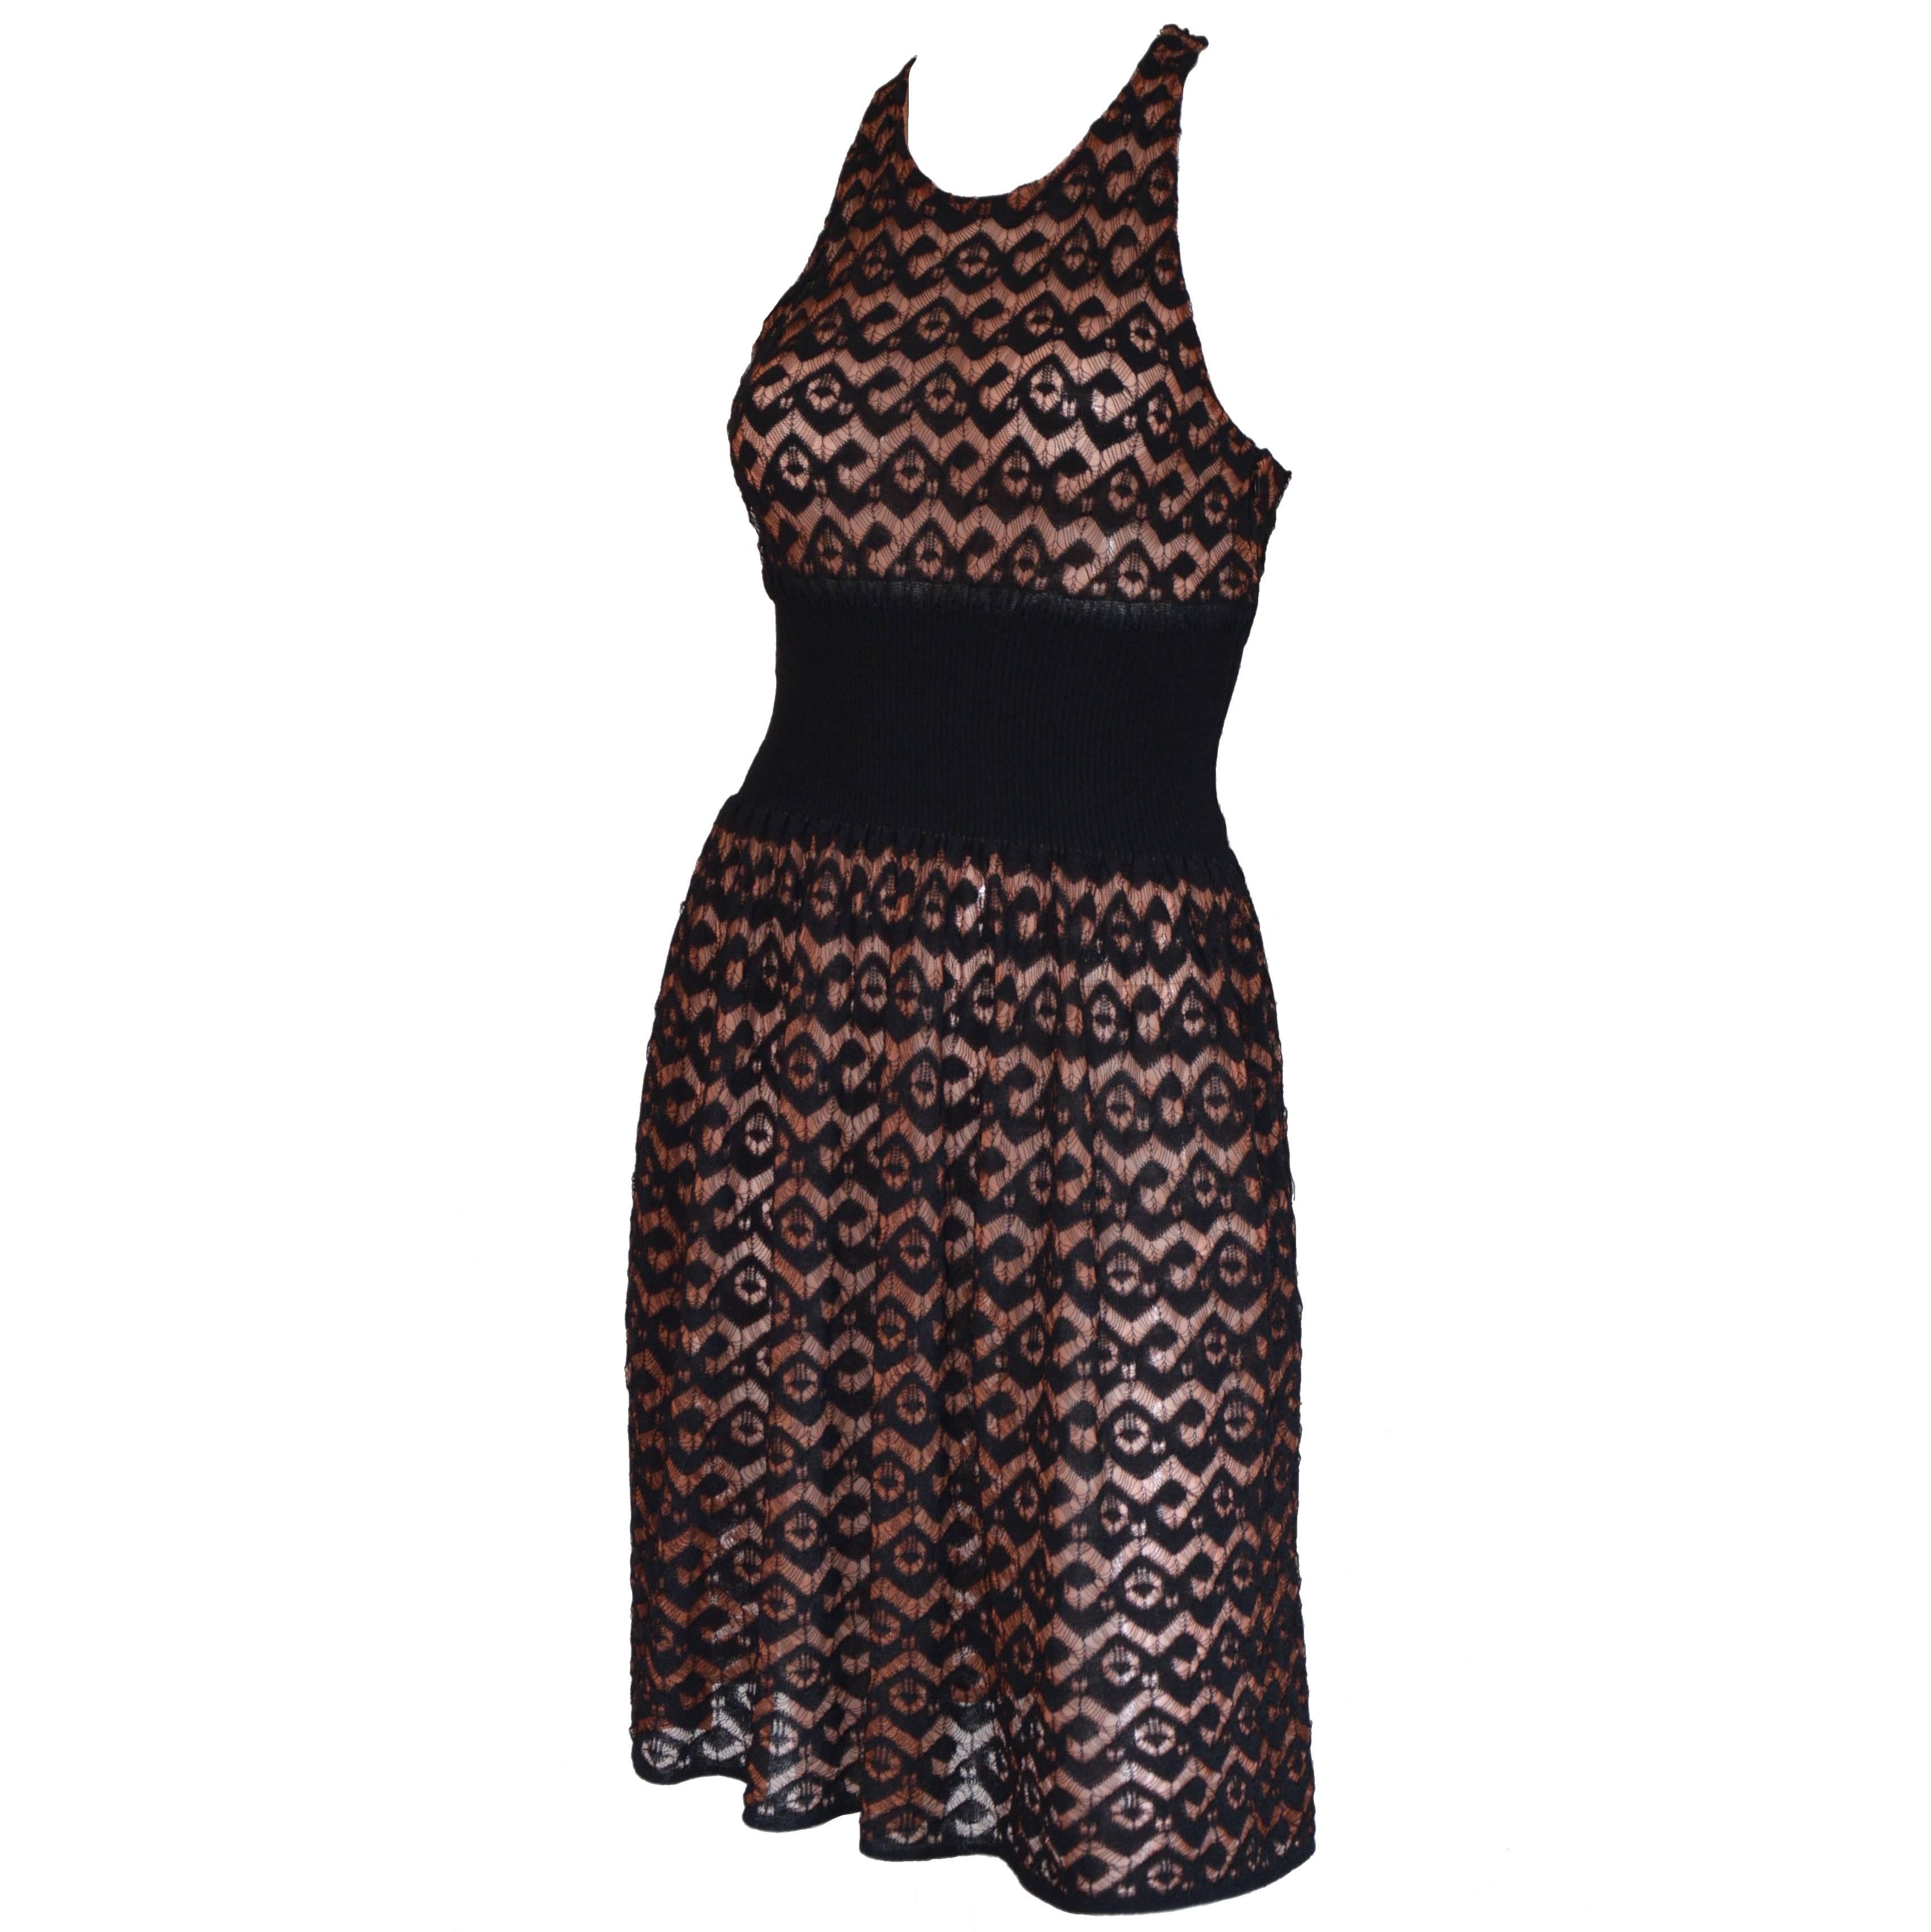 Azzedine Alaia black lace dress with built in beige-pink slip dress and shaped underlined waist. Sophisticated back detail. Circa 2015.
Fr size : 40 
Fits a Small - Medium